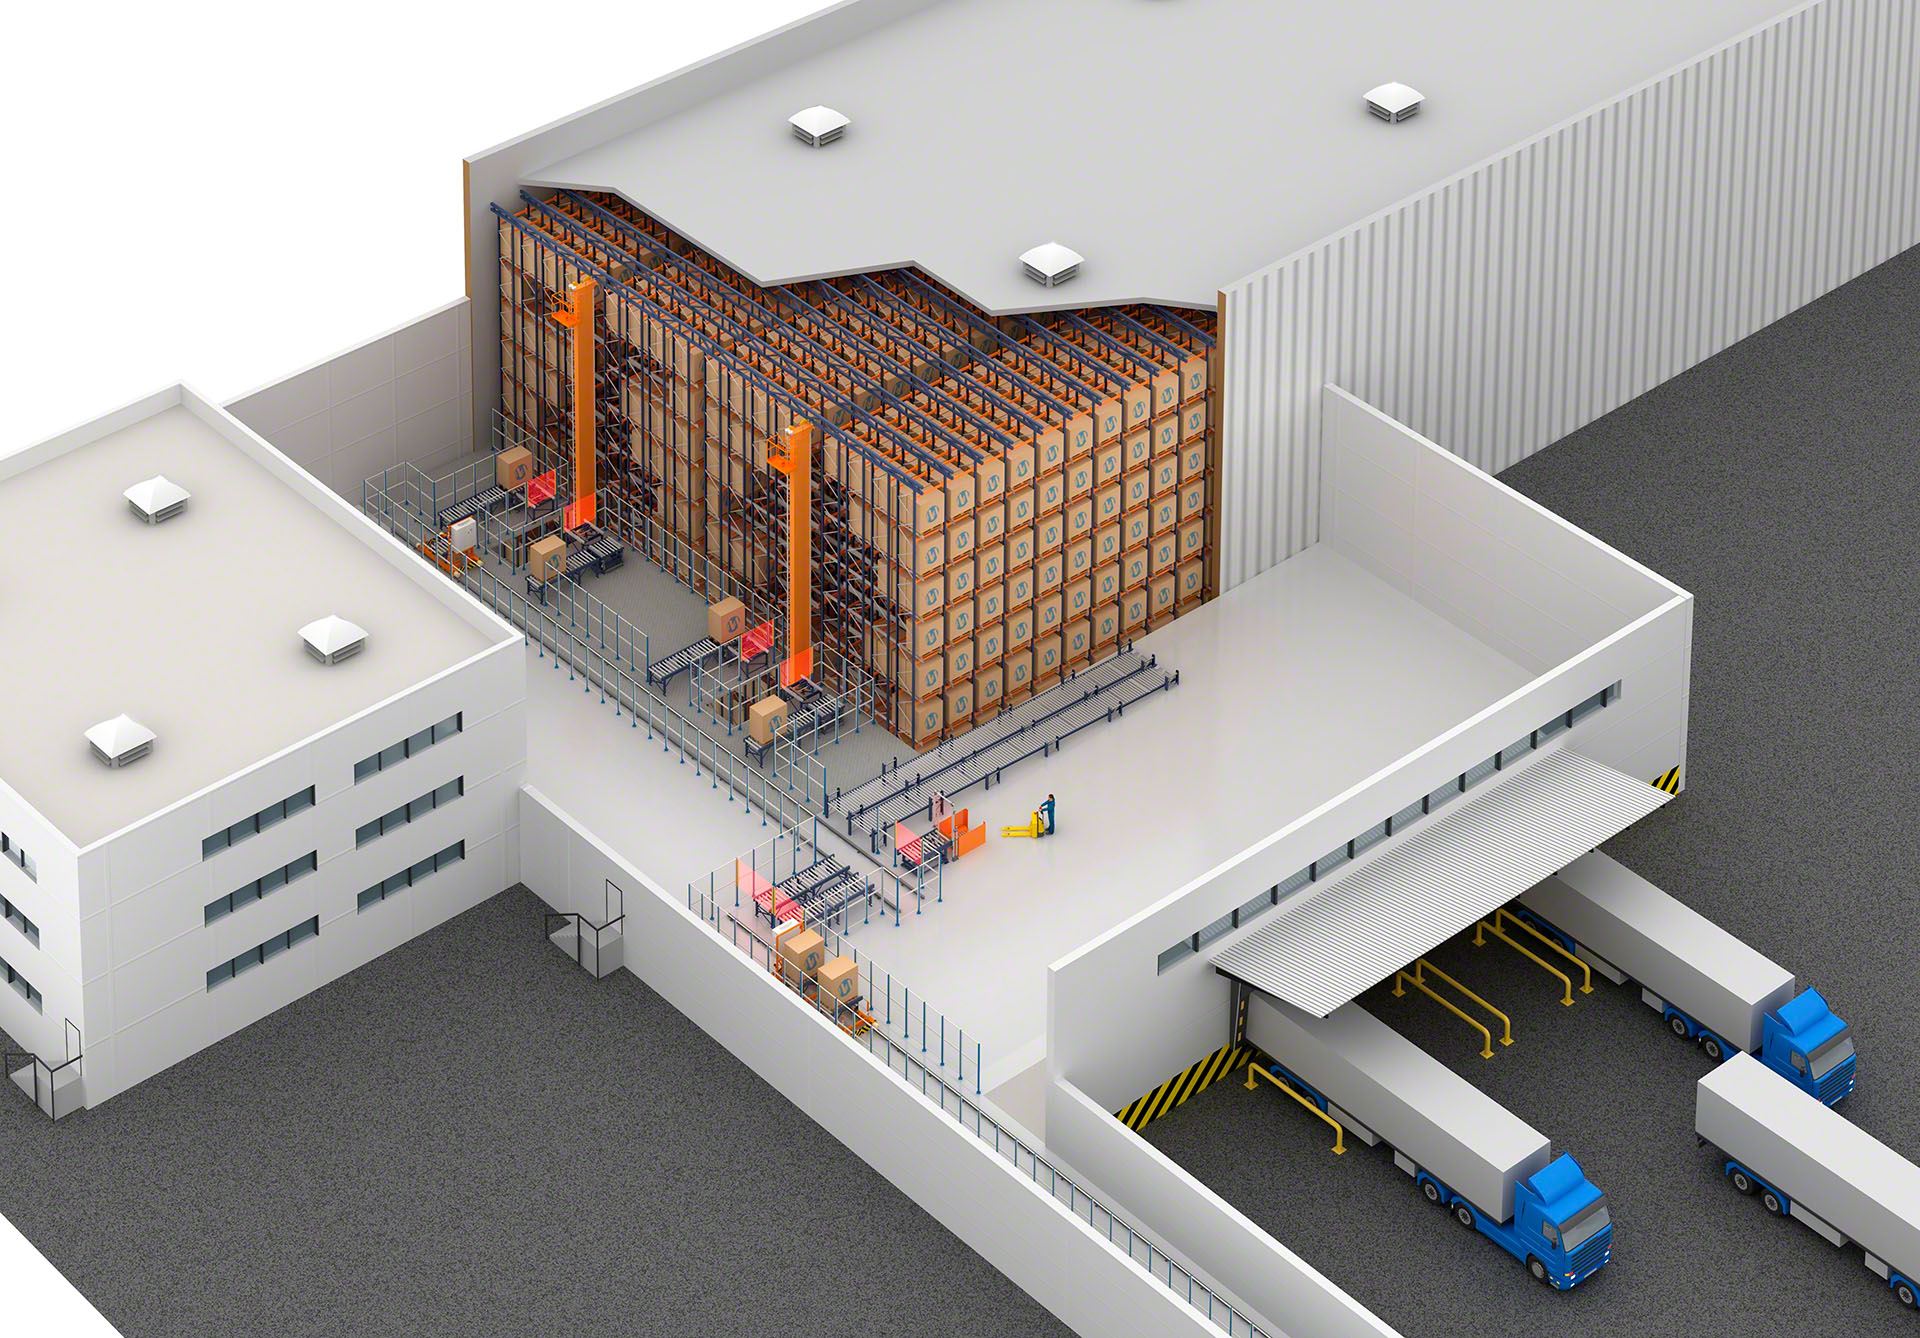 The mixture of automated systems with a clad-rack structure optimizes the capacity of a storage facility